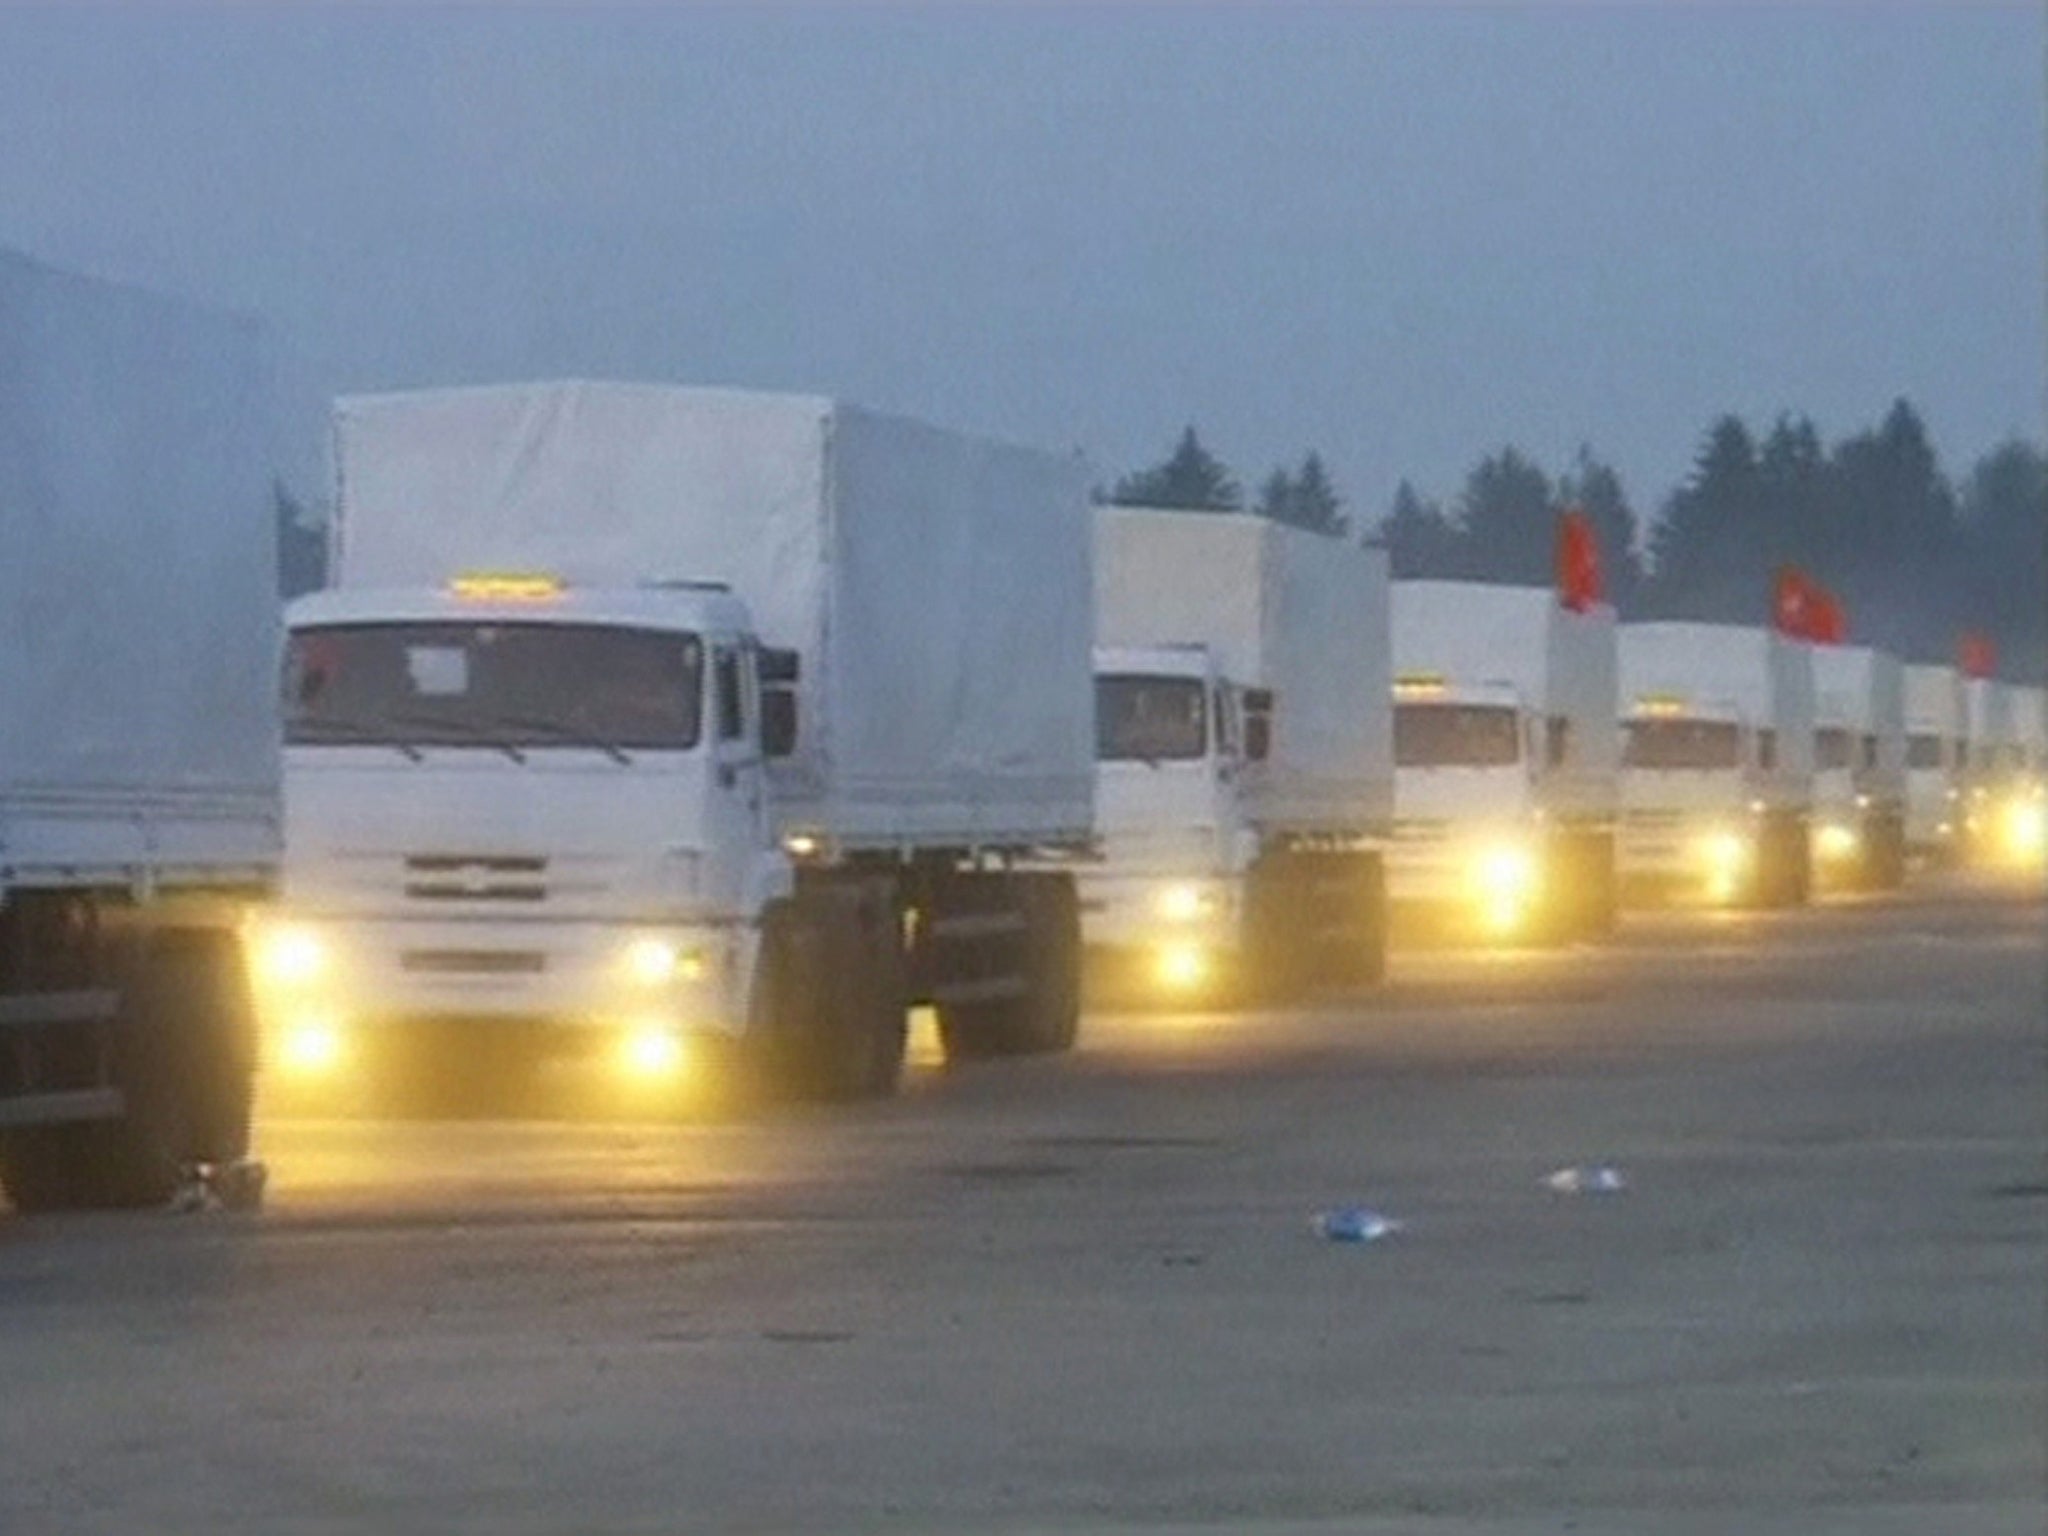 Ukraine Crisis Russian Aid Convoy Heads Straight For Rebels In Luhansk As Fears Intensify Of